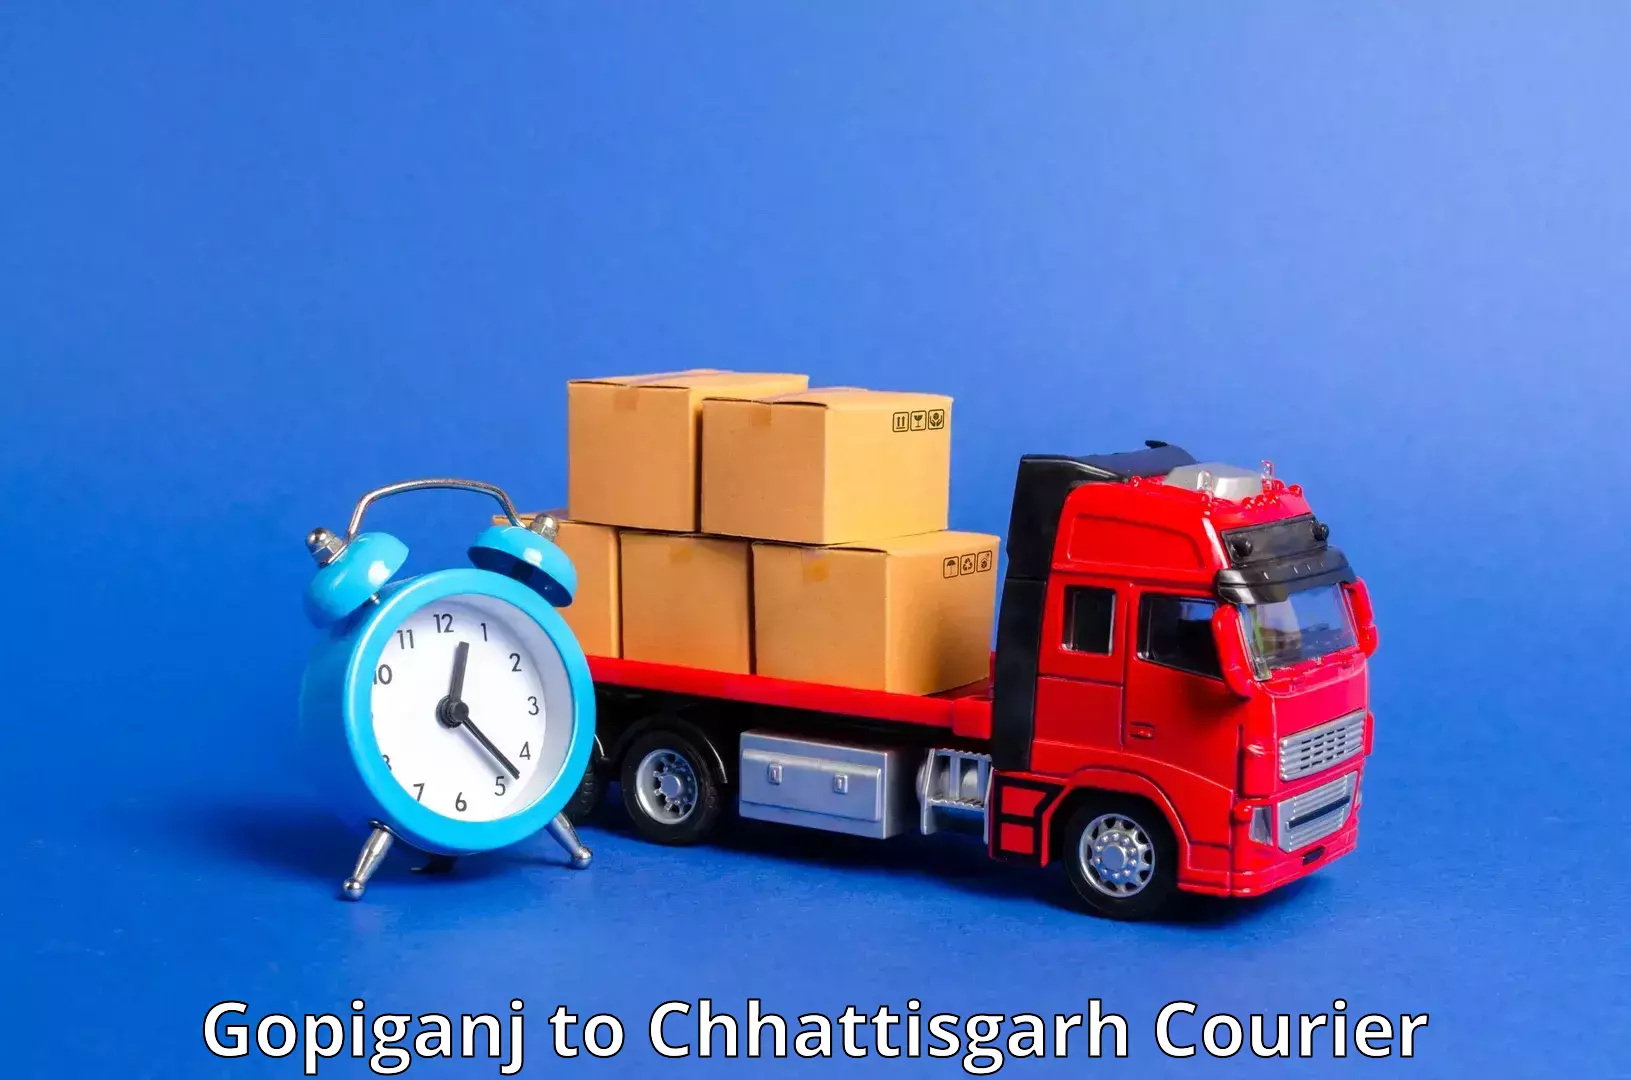 Package delivery network Gopiganj to Bhatapara